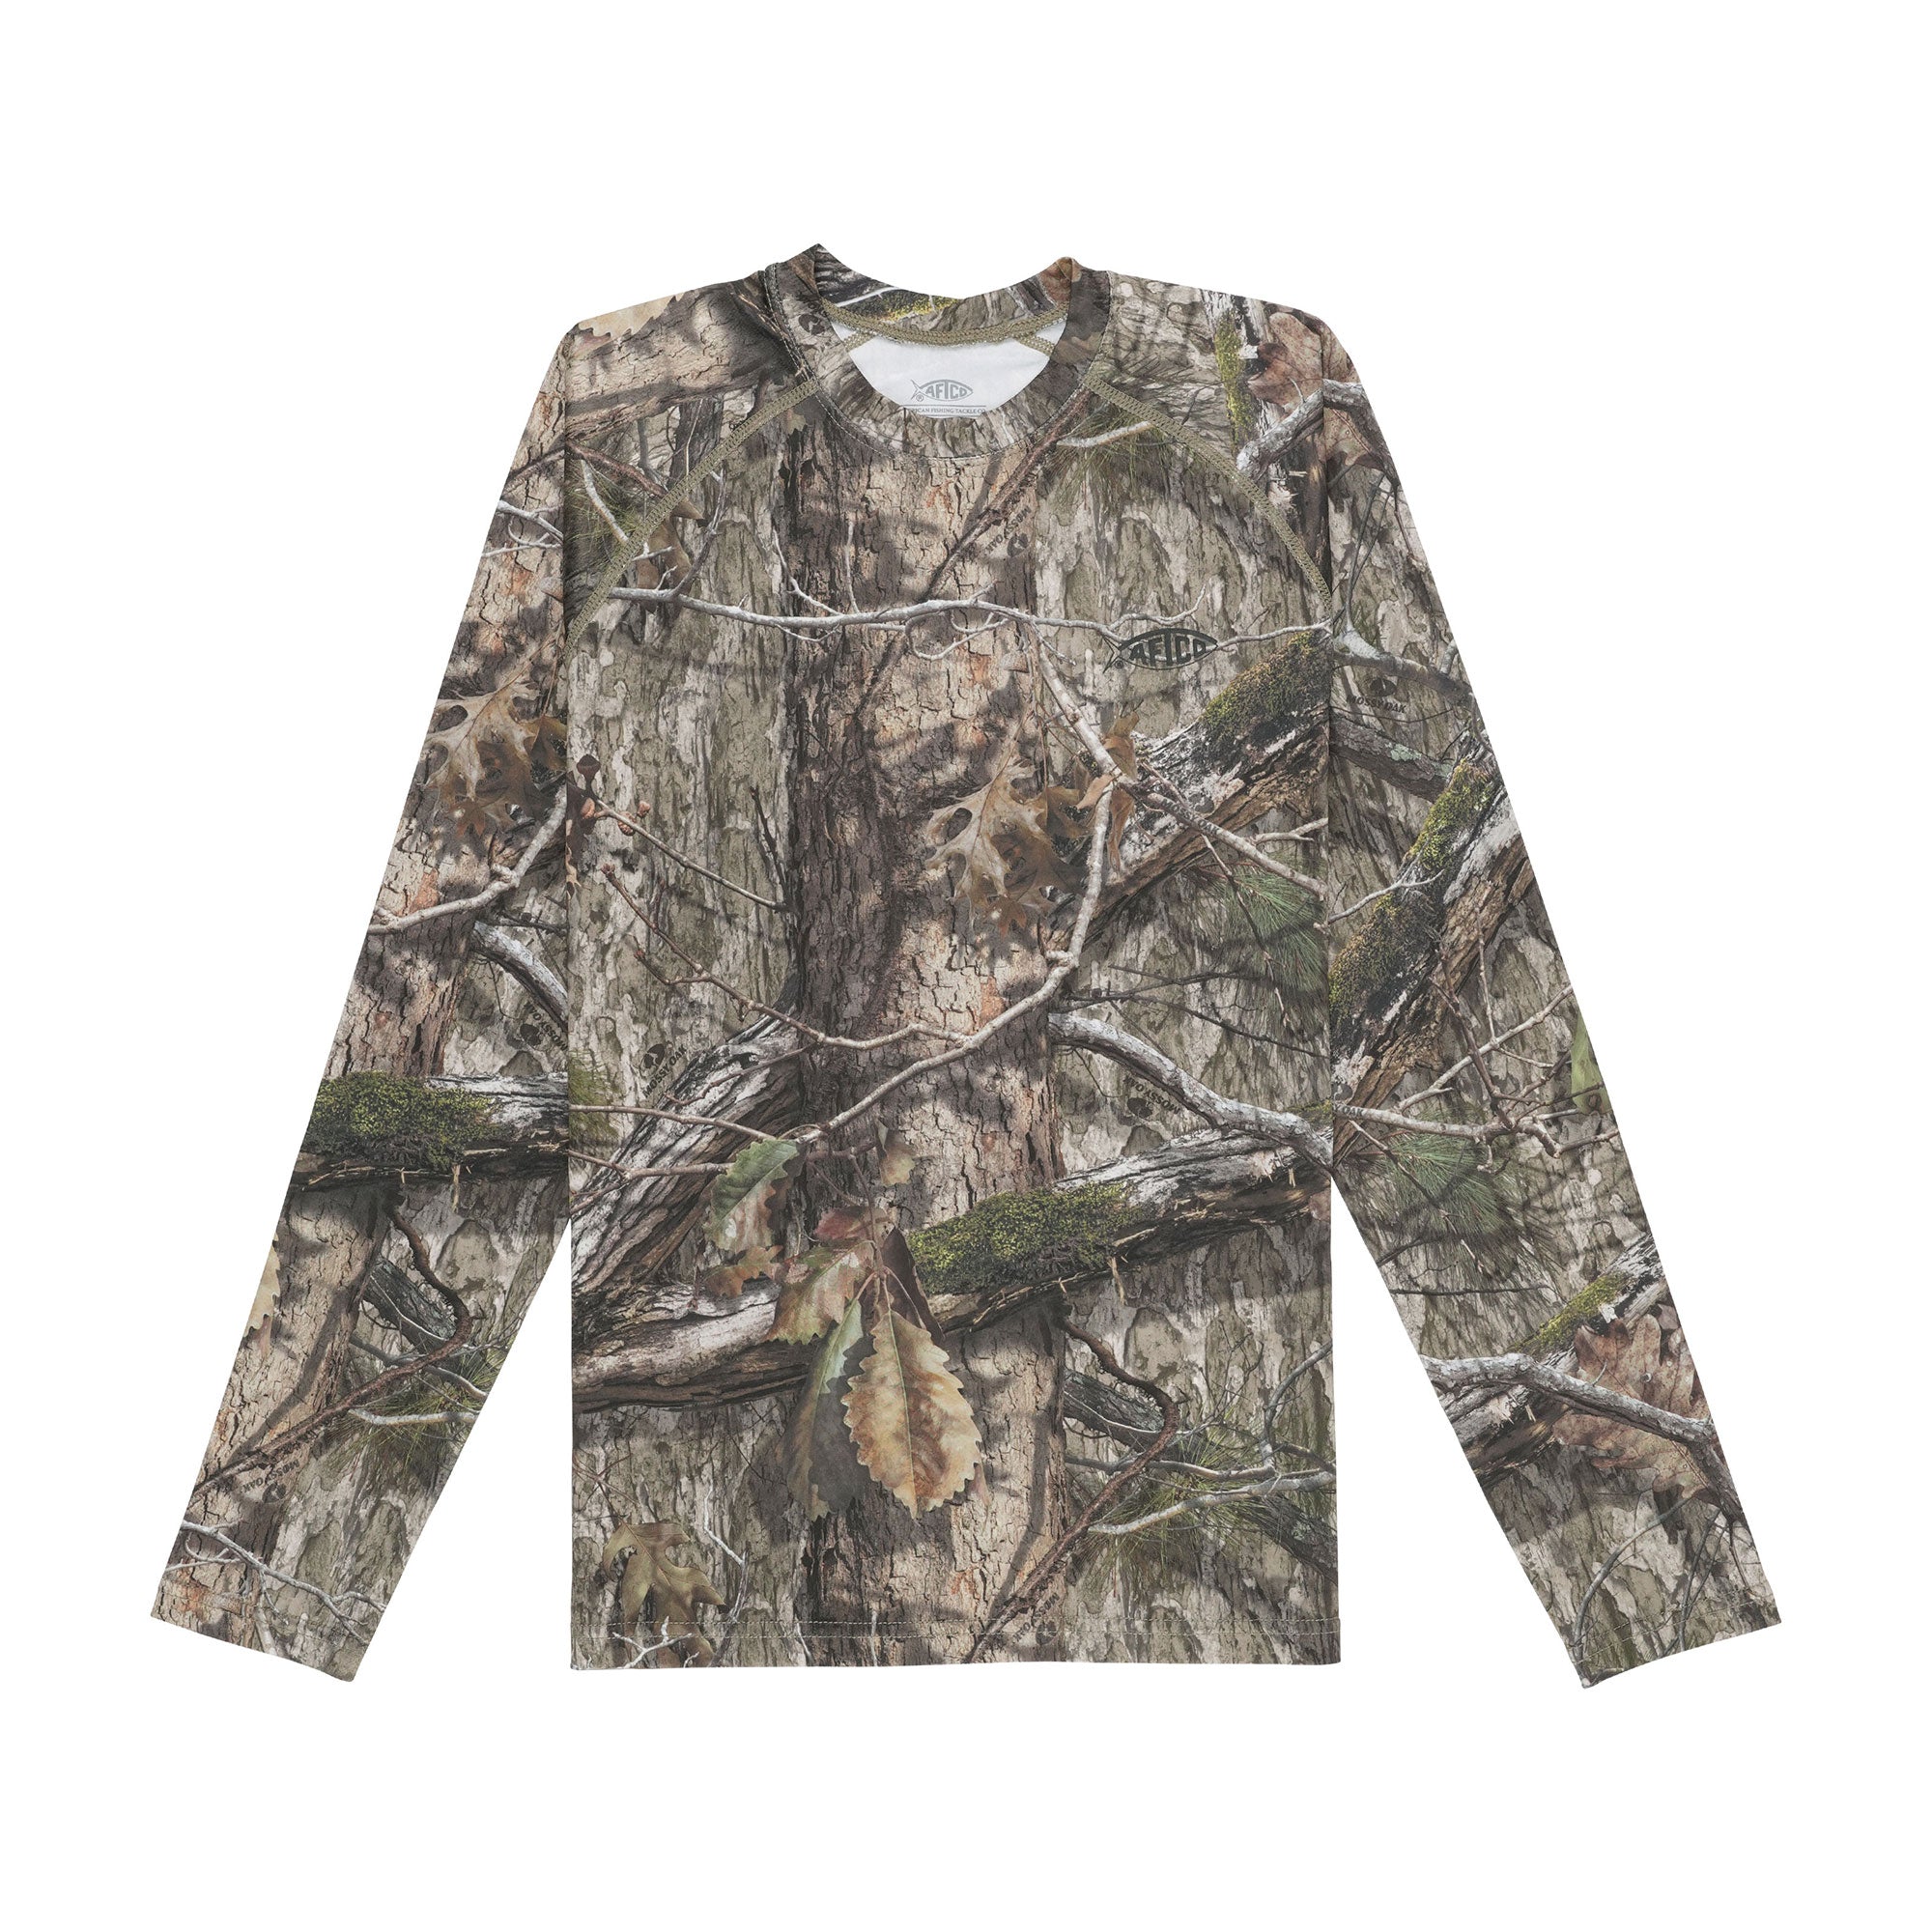 MOSSY OAK® CAMO LS PERFORMANCE SHIRT COUNTRY DNA